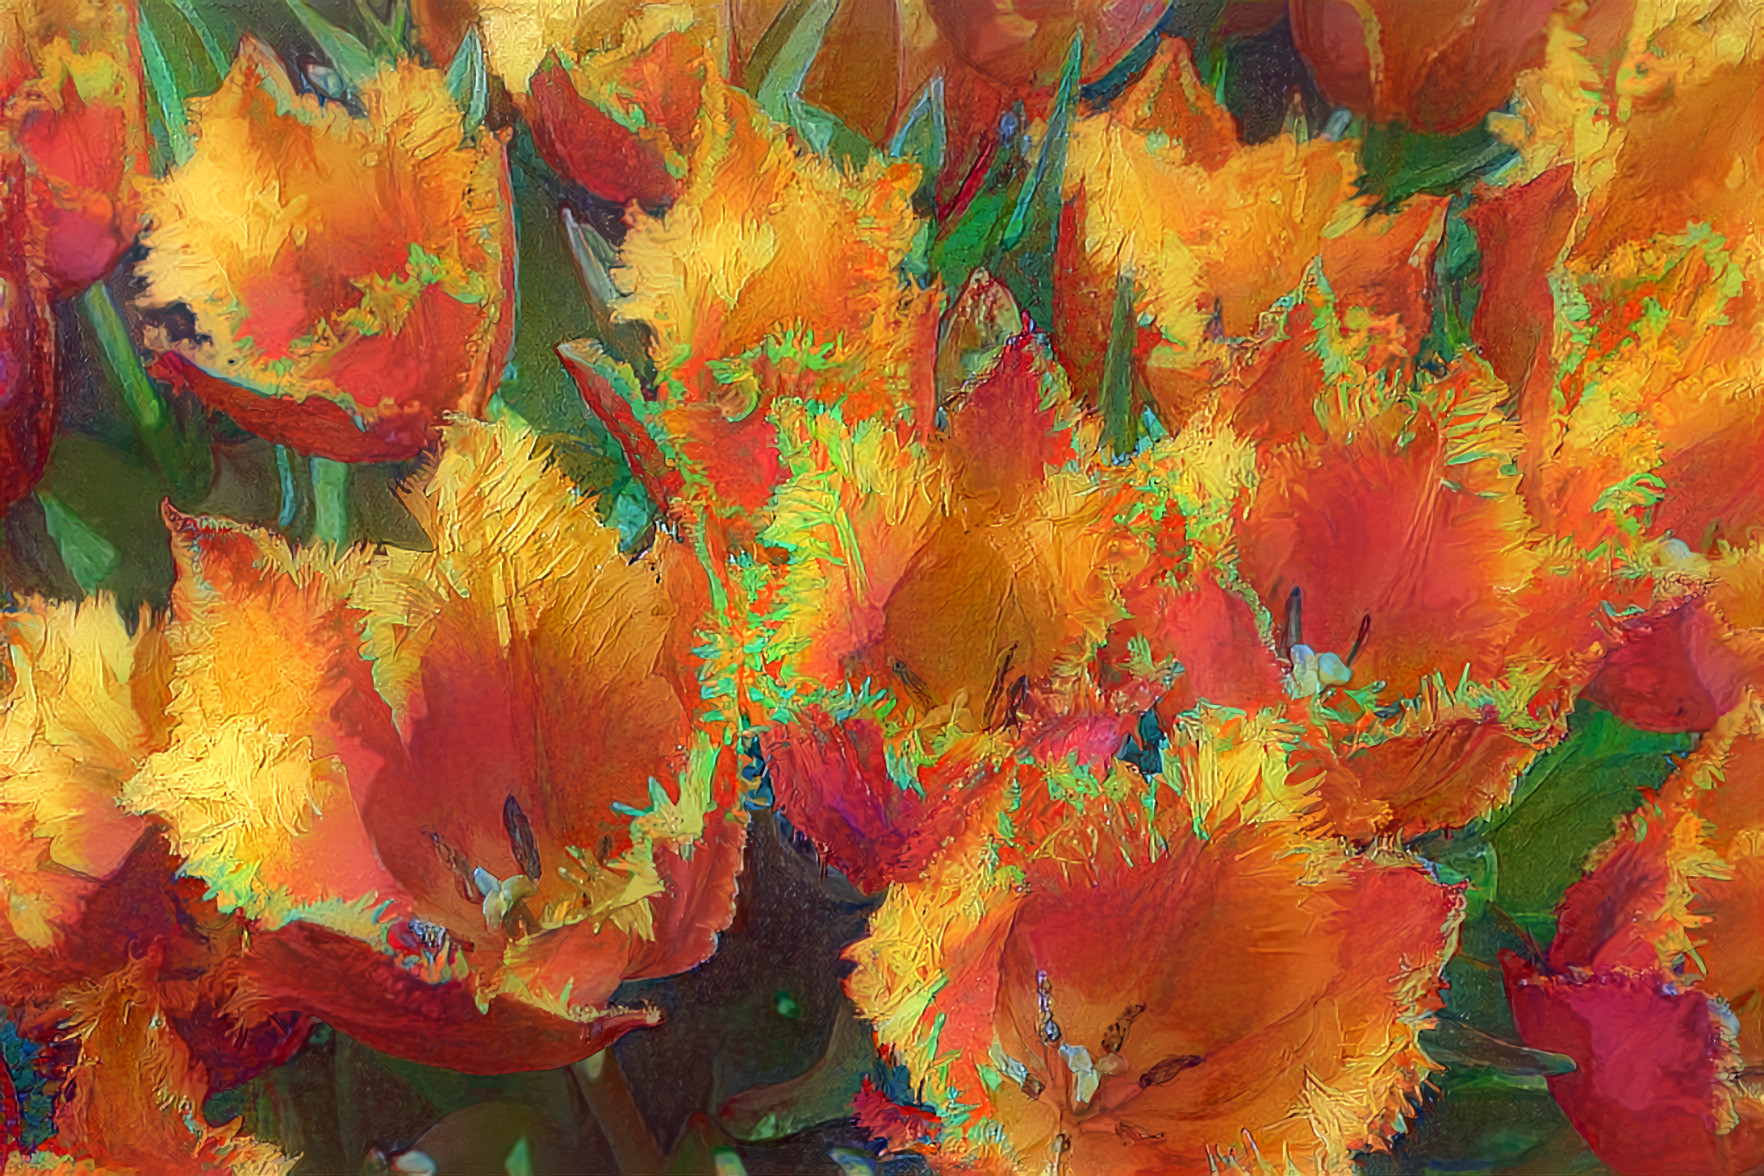 Frilled Tulips.  Source photo, my own.